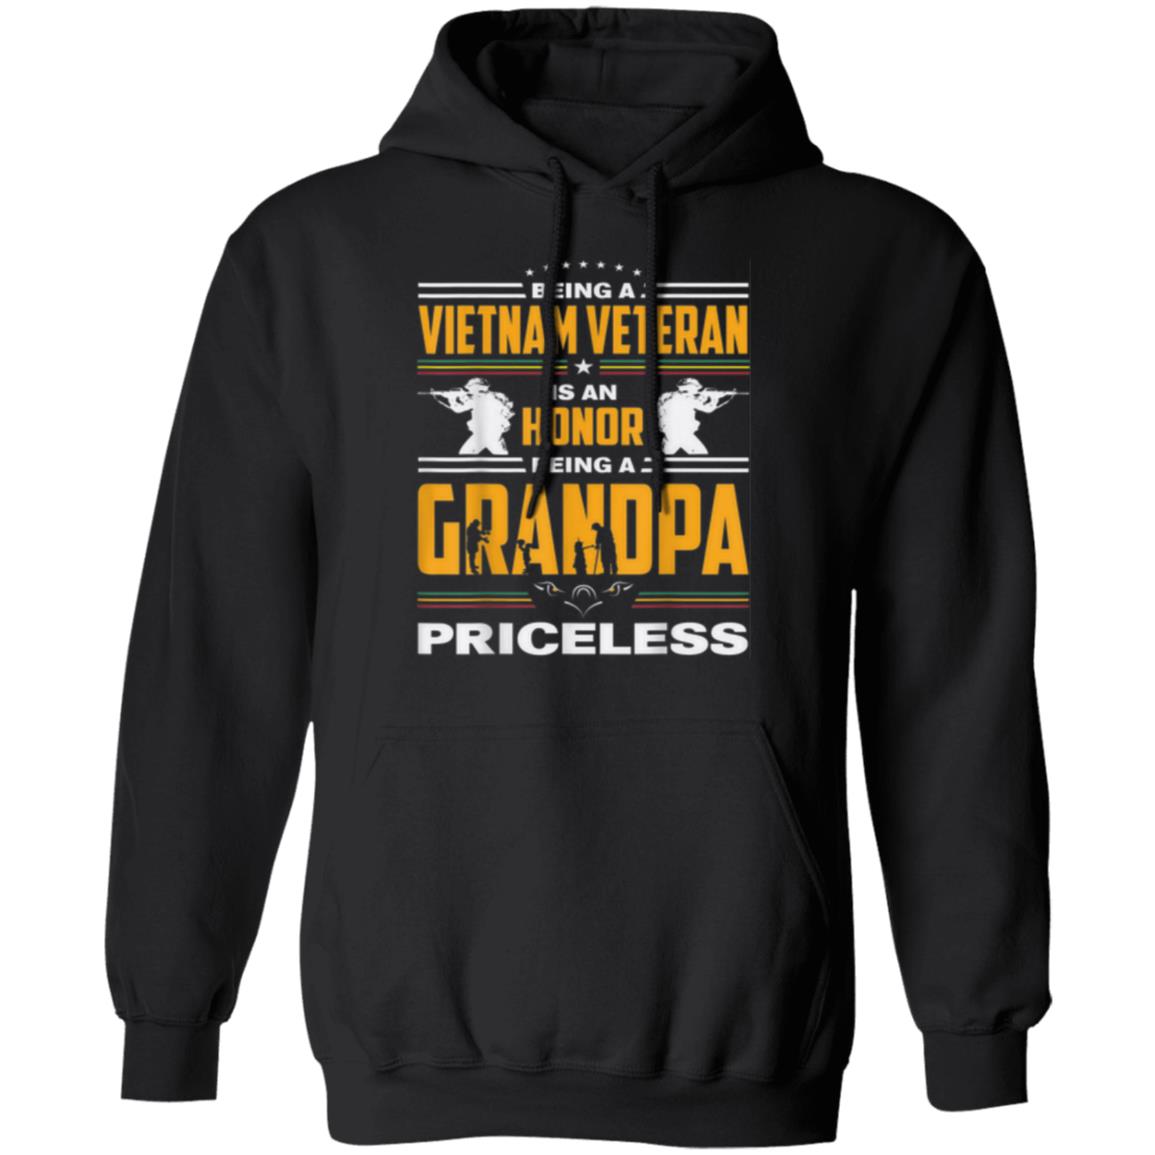 Being Vietnam Veteran is an Honor Papa is Priceless Cotton Youth T Shirts Short Sleeve for Teenager Boys Girls 